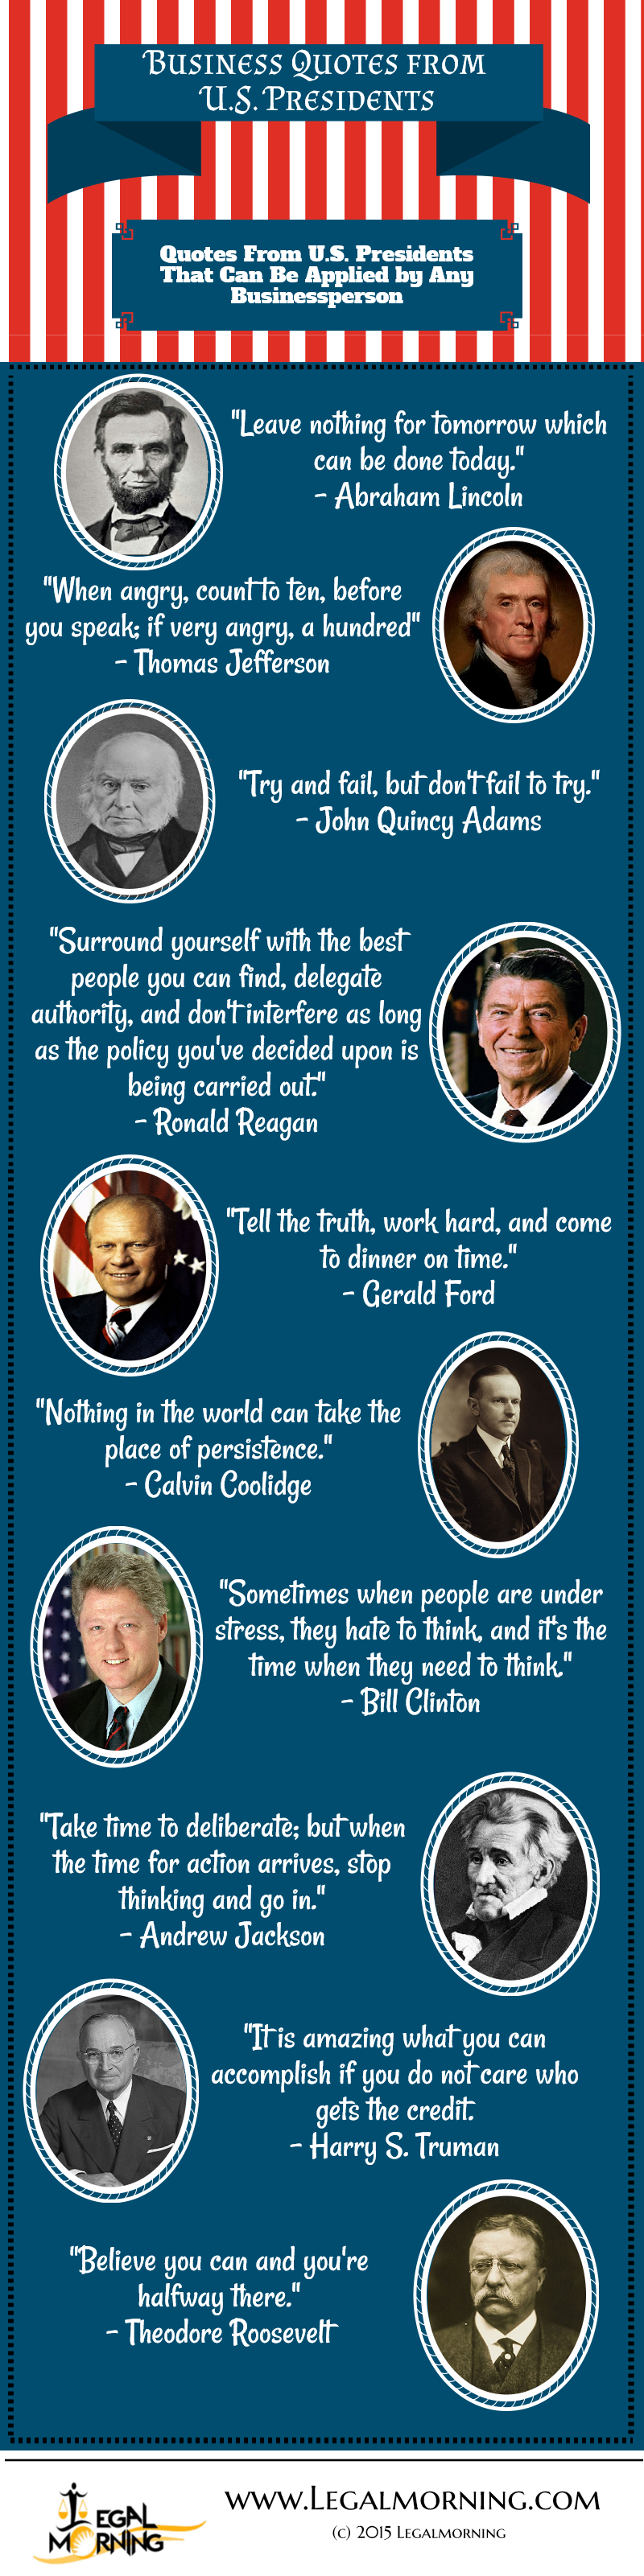 Business Quotes from United States Presidents [Infographic]